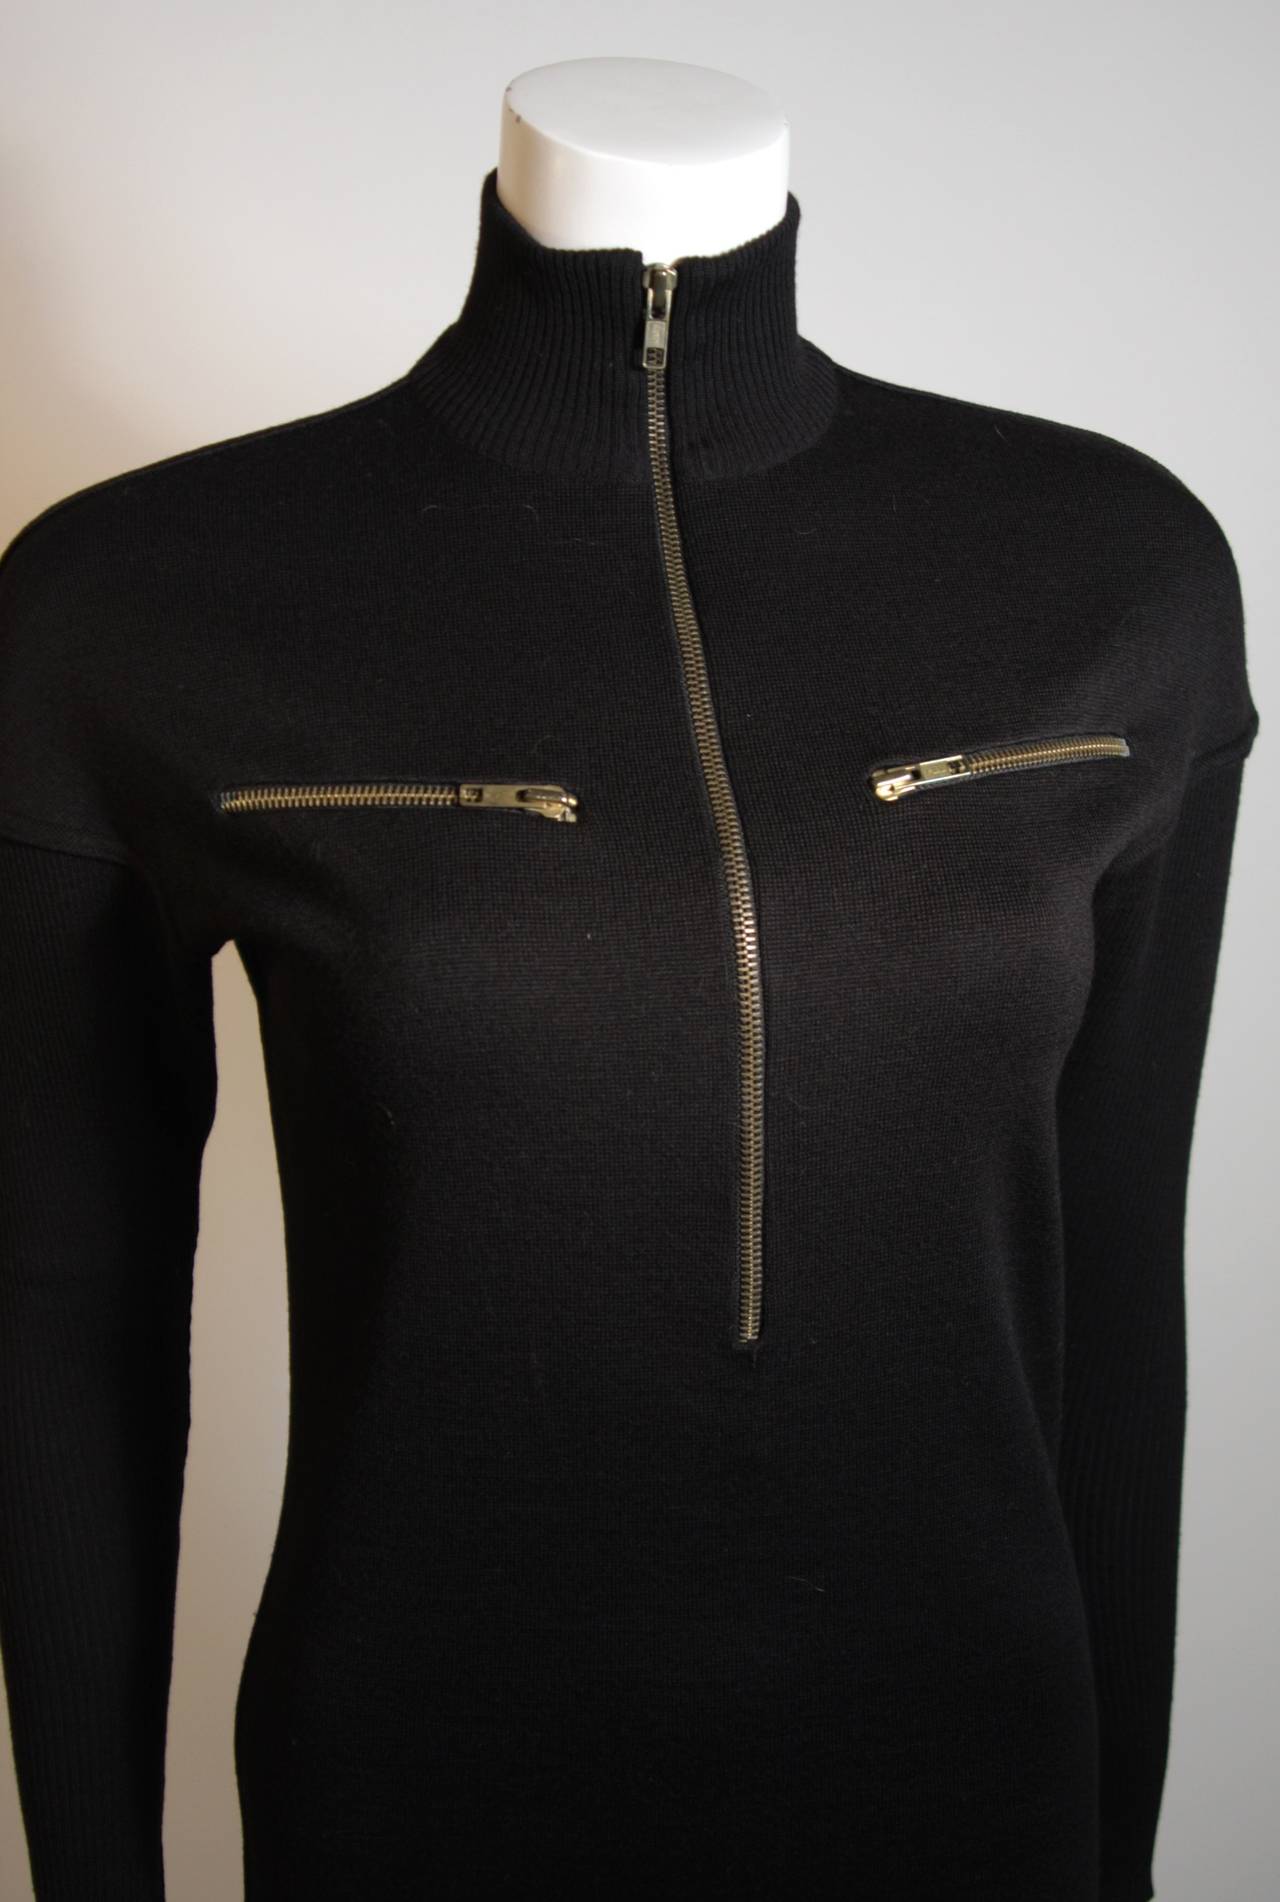 Alaia Black Wool Sweater with Zippers Size XS 1